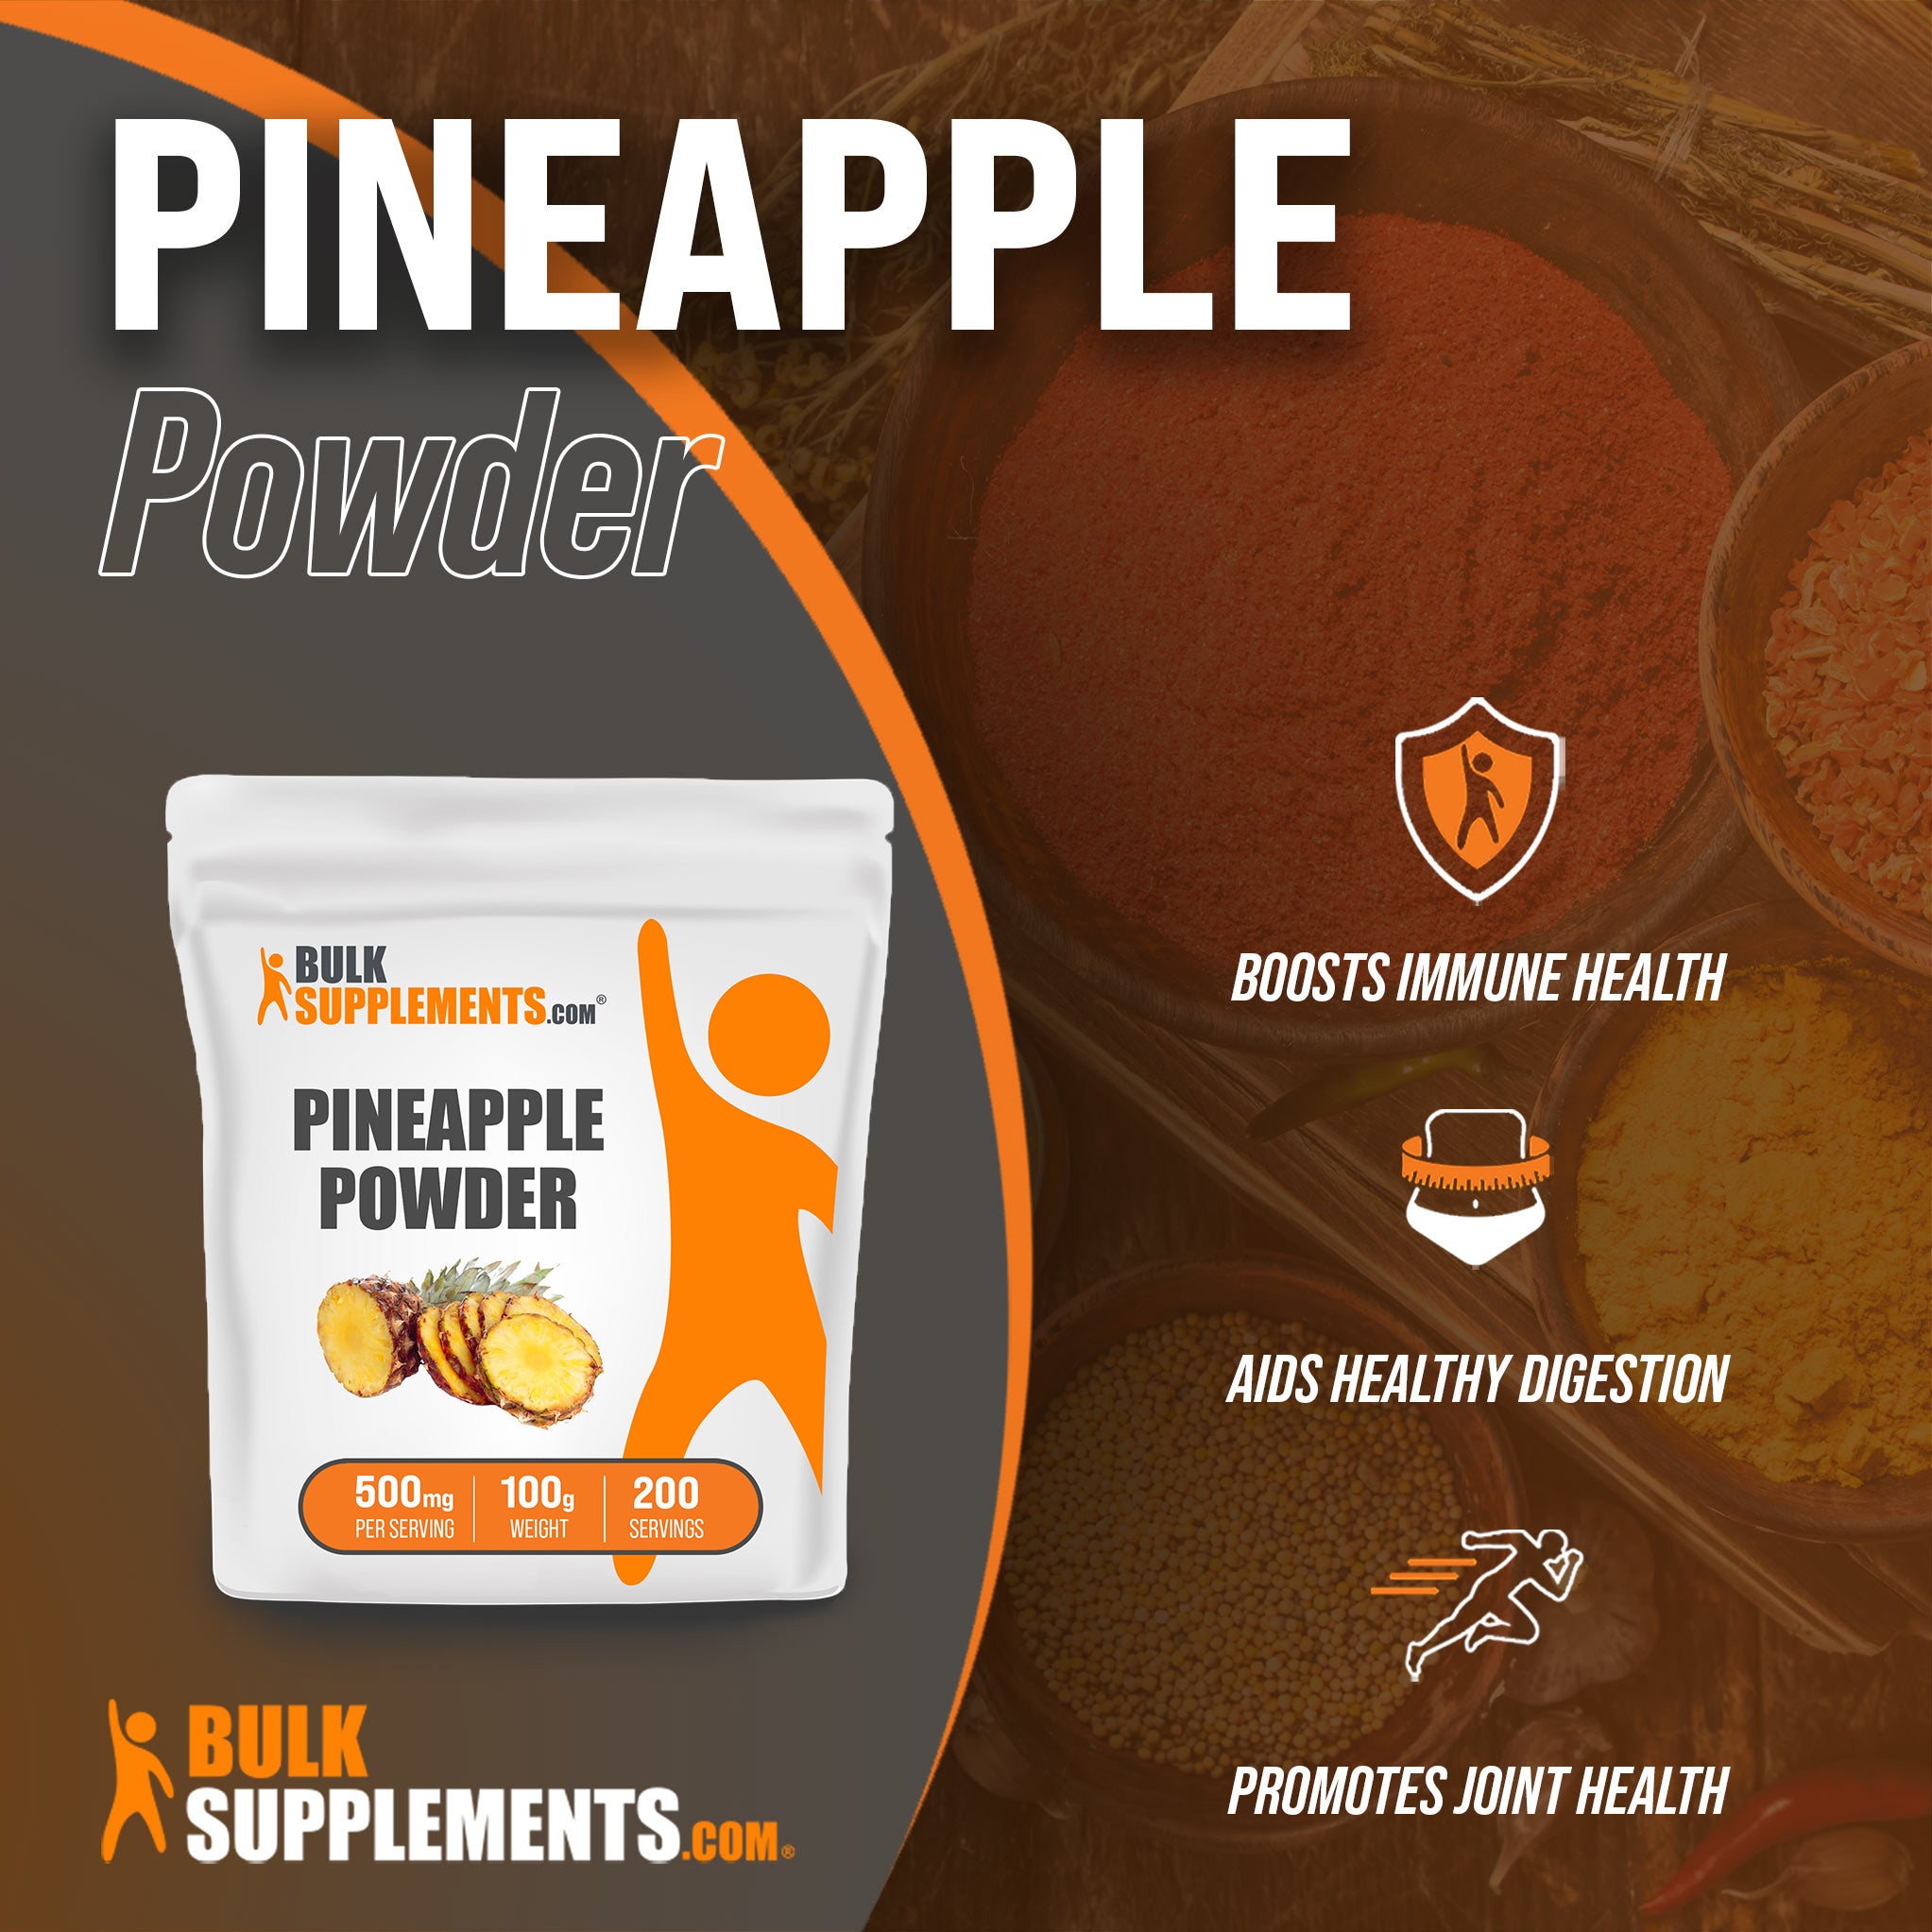 Pineapple Powder: boosts immune health, aids healthy digestion, promotes joint health